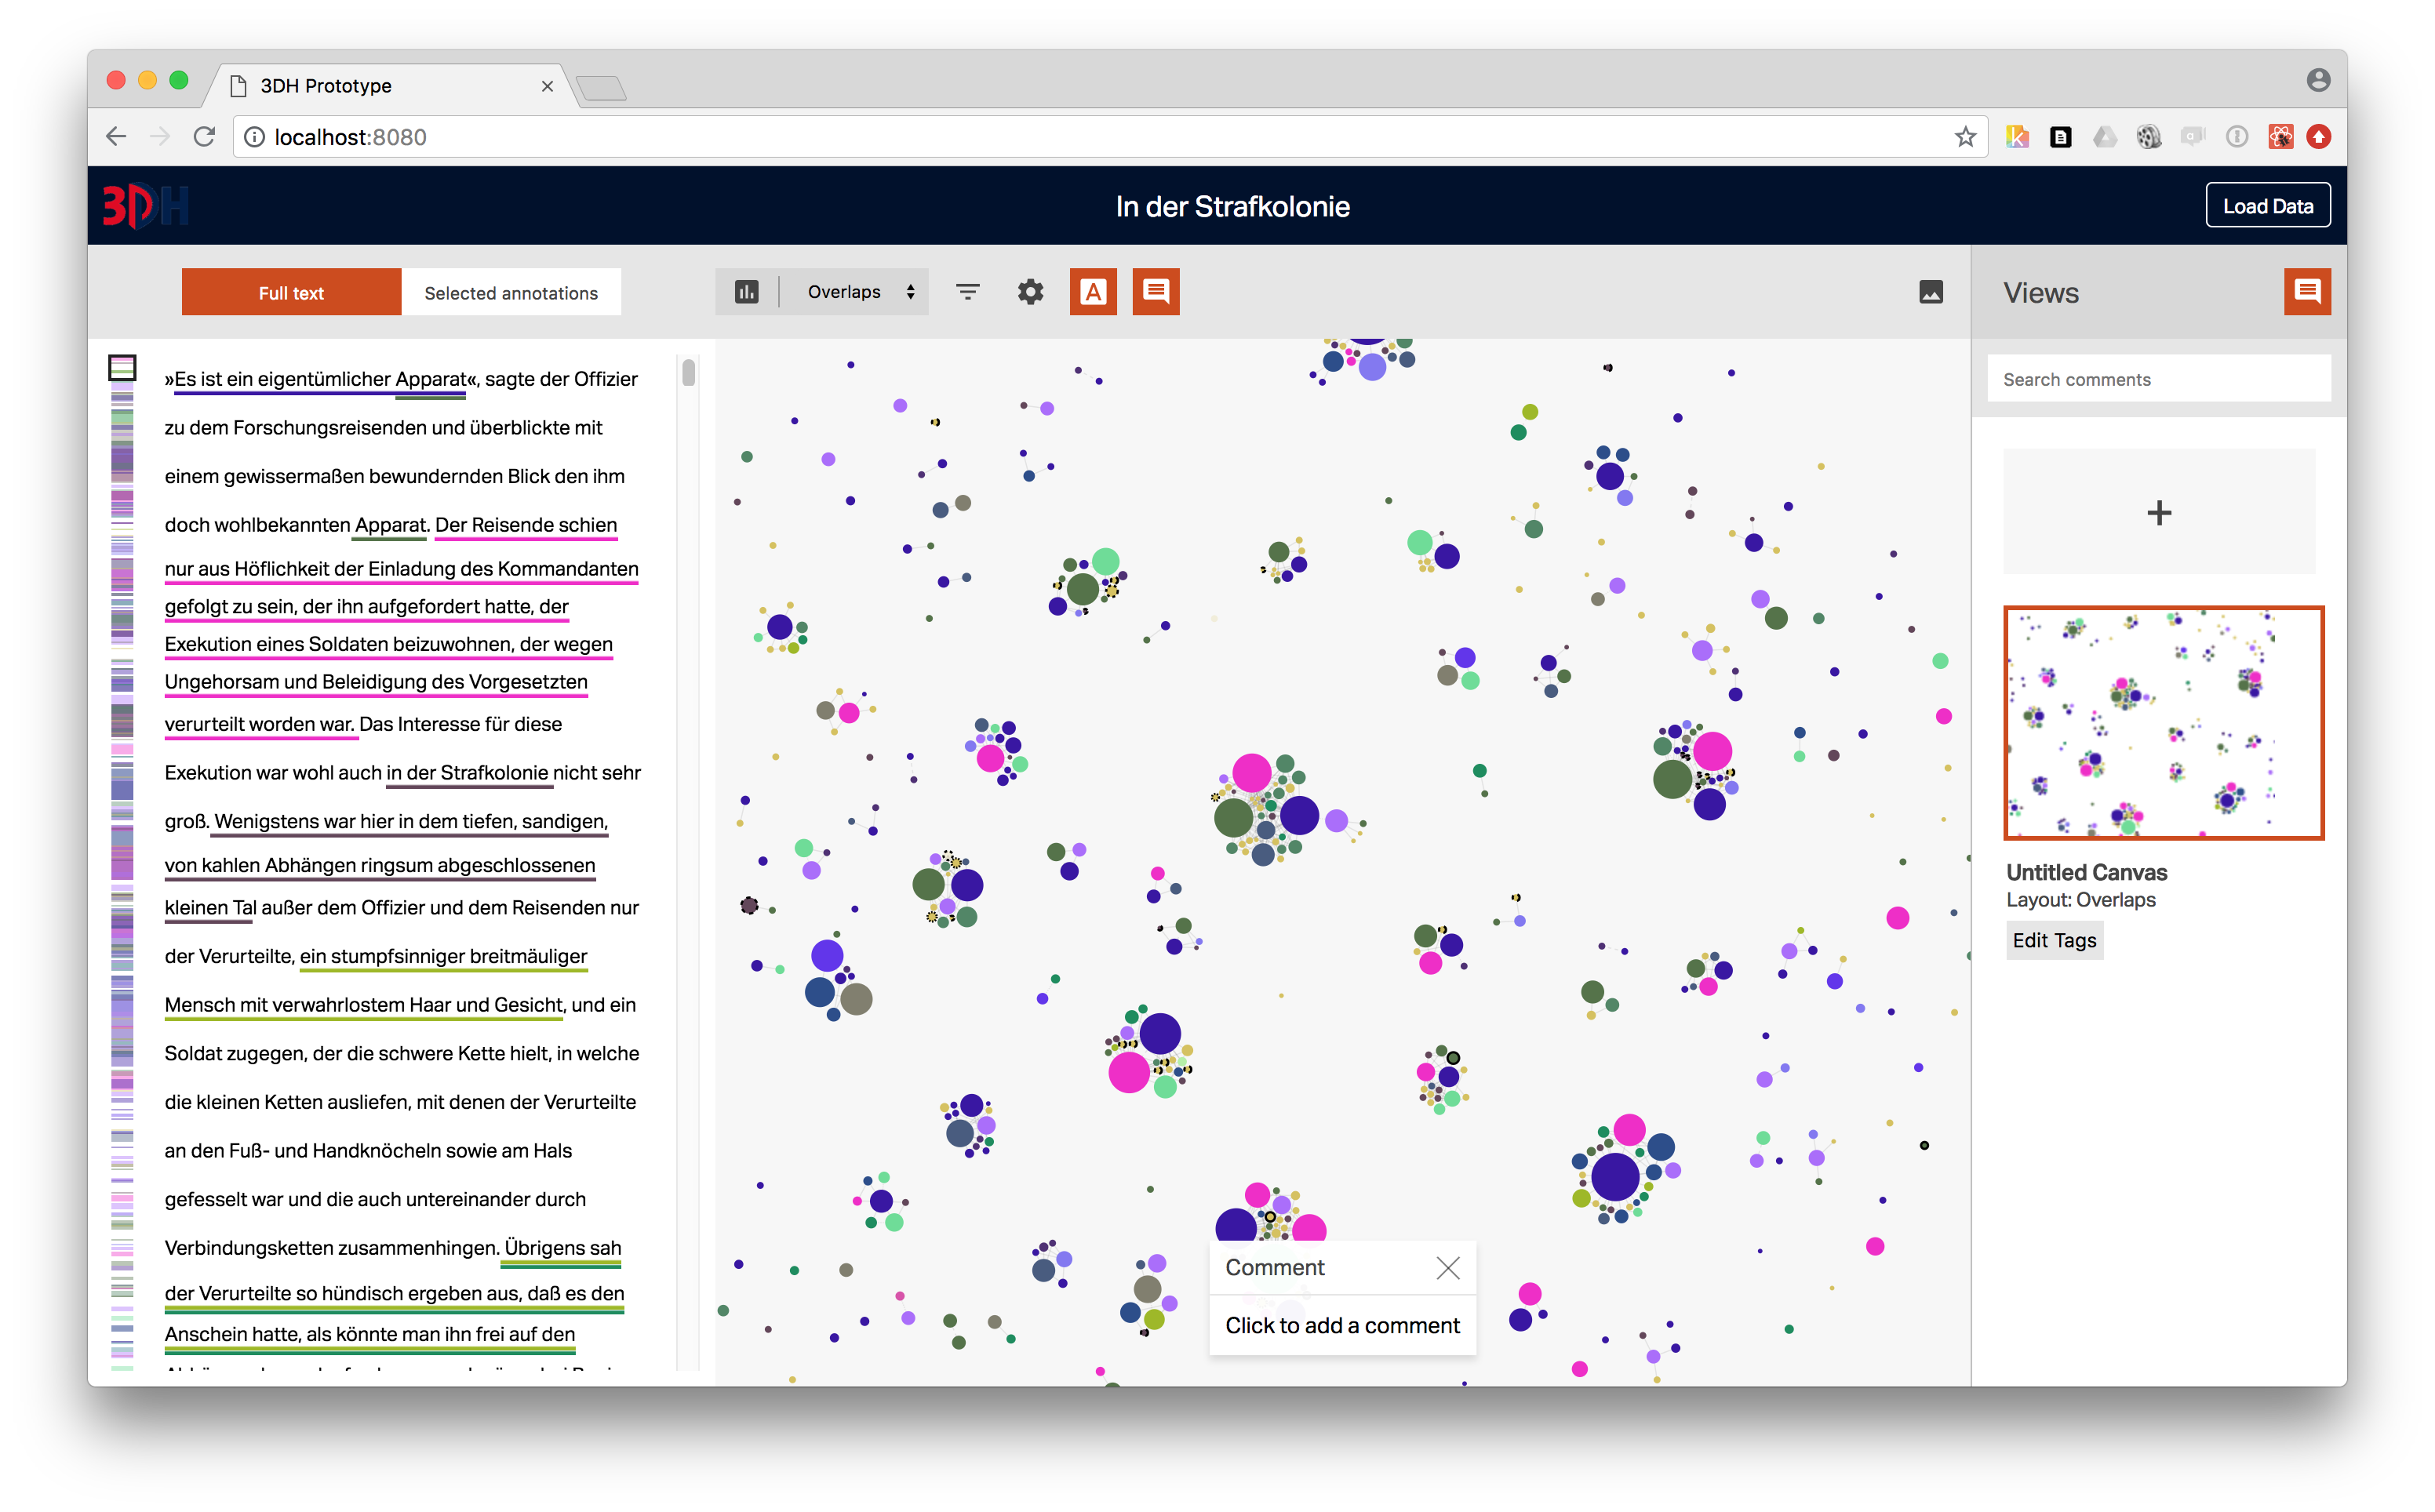 A screenshot of a Stereoscope scatter plot of various colored circles
                        in clusters.